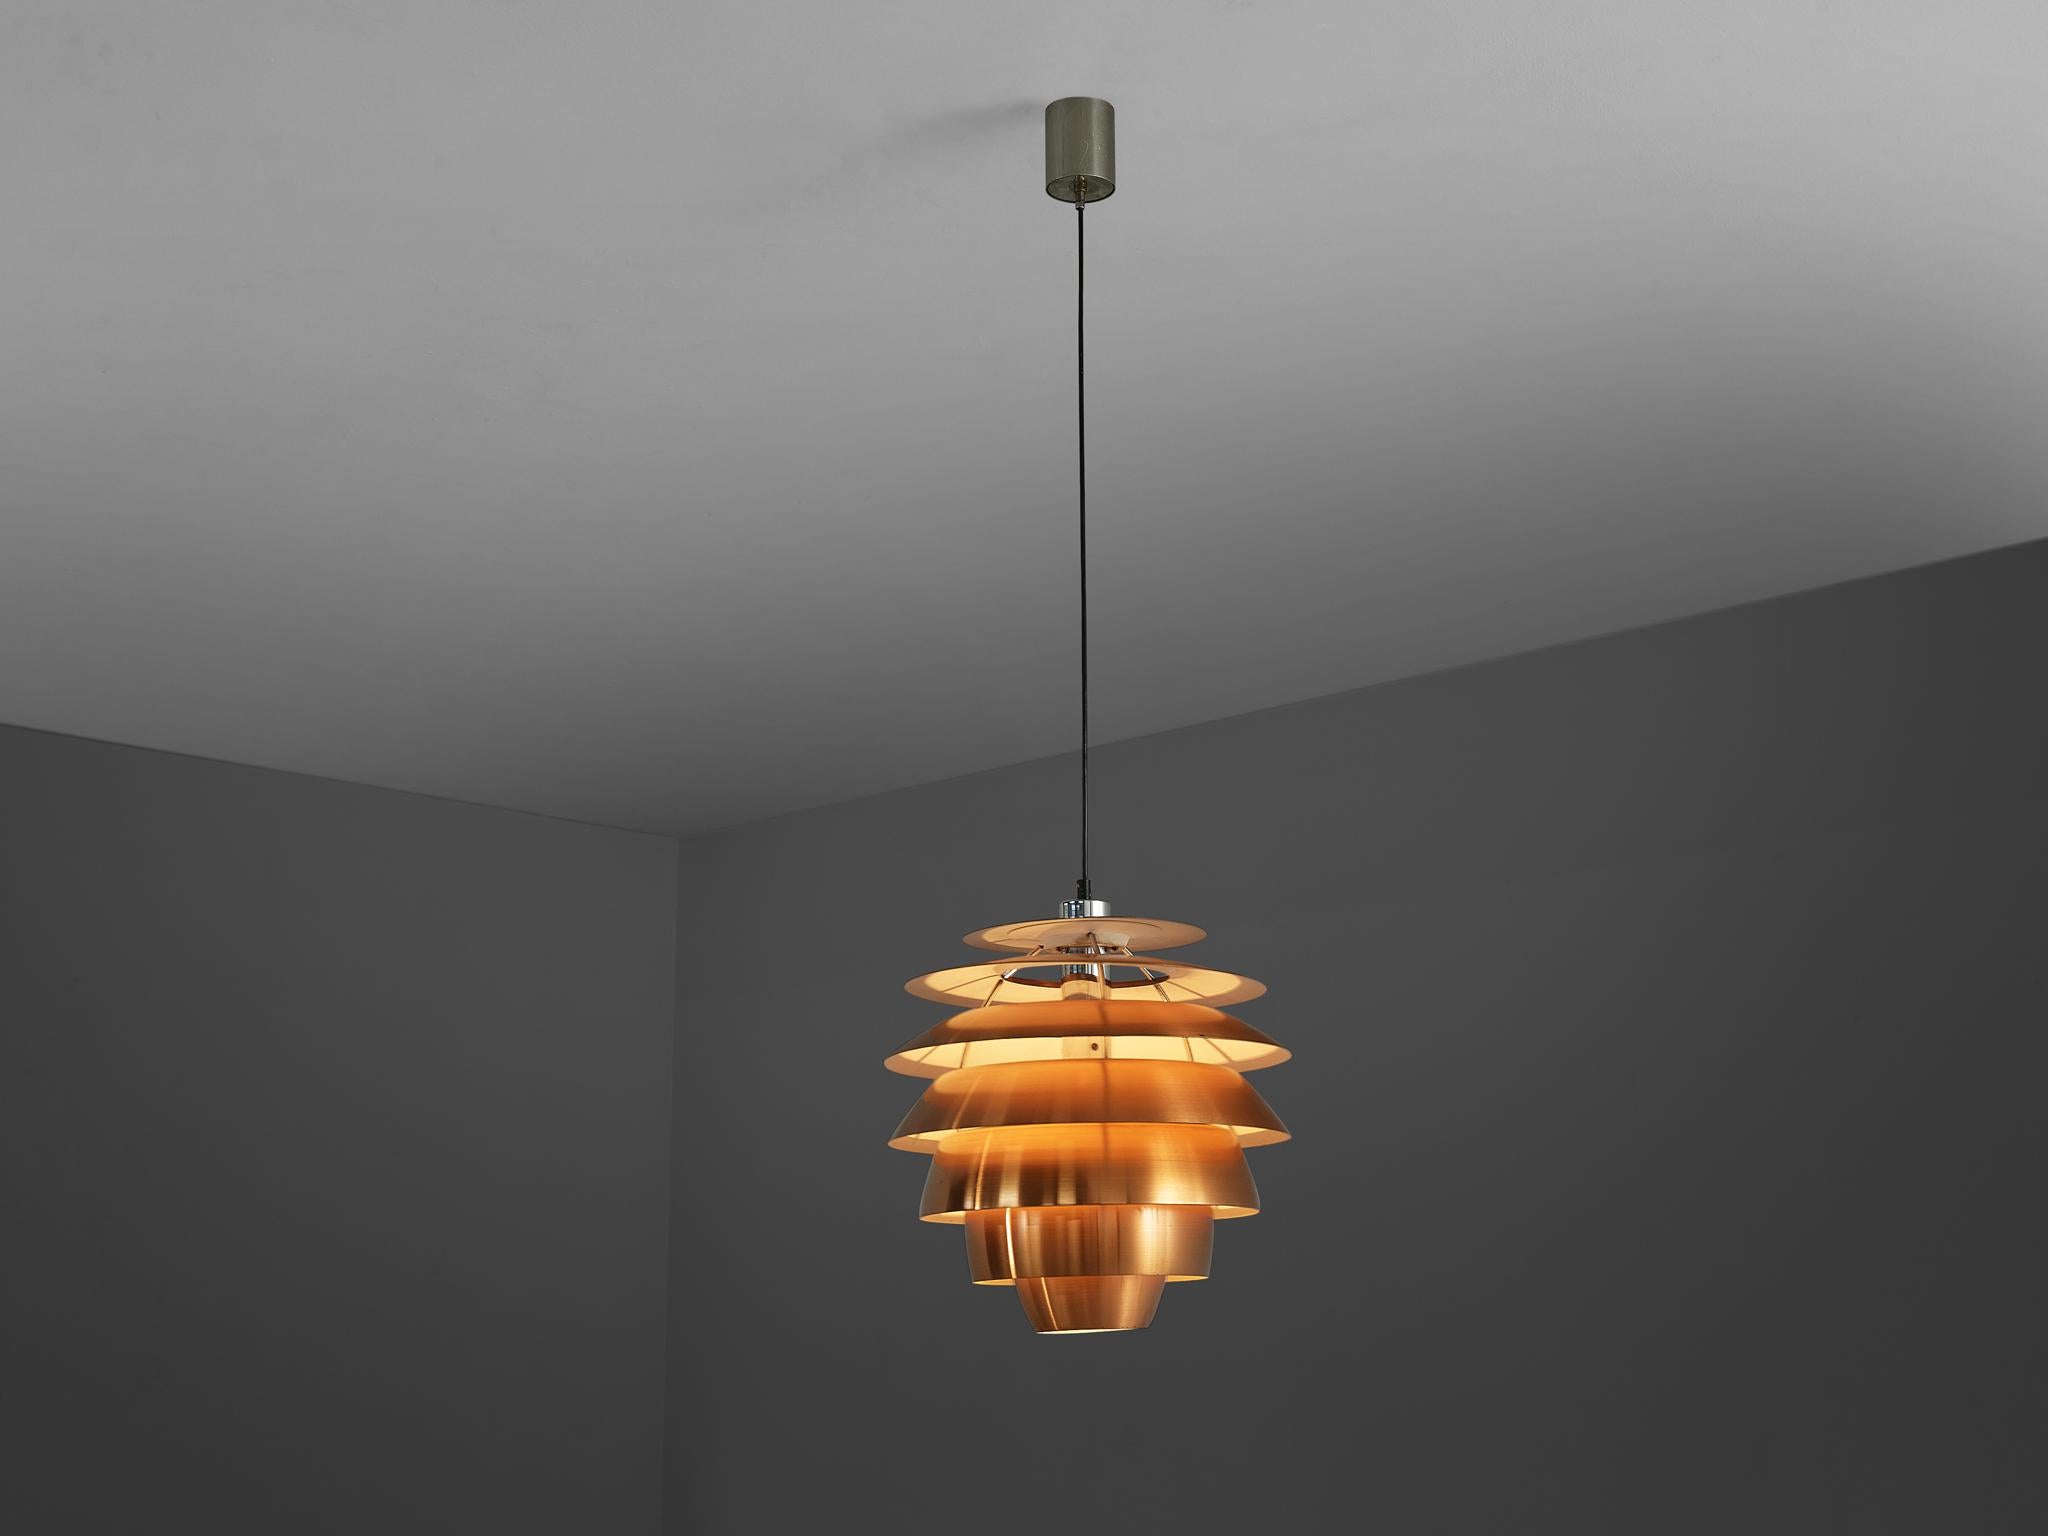 Stilnovo, pendant, model '1231', brushed copper-plated aluminum, chrome, Italy, 1960s

This exquisite pendant lamp by Stilnovo showcases a carefully crafted structure composed of circular copper leaves arranged in seven layers. The voluminous design